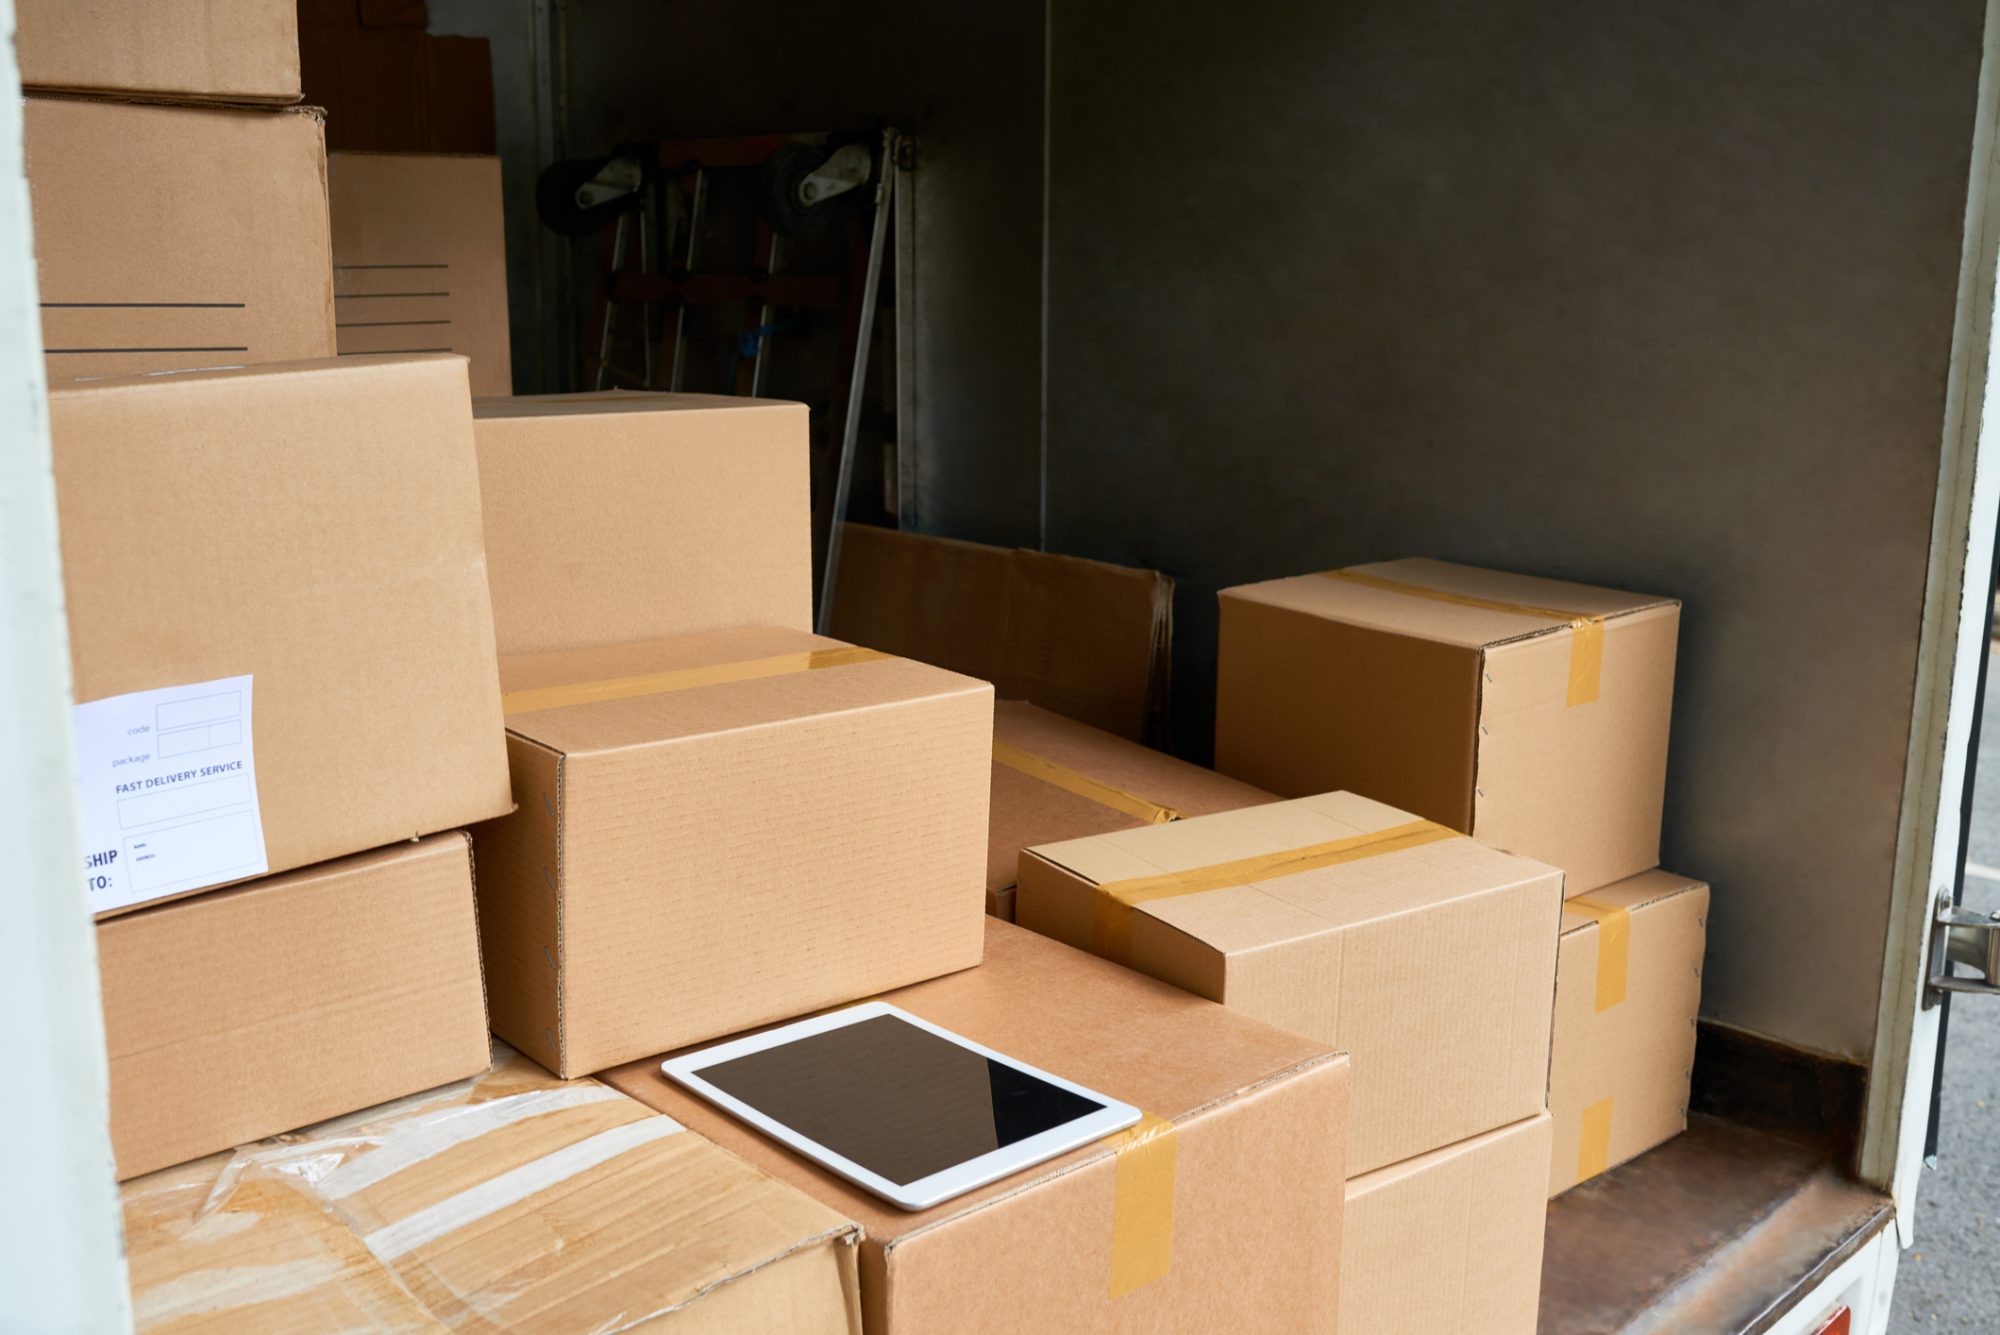 Many cardboard boxes and digital tablet insite delivery truck